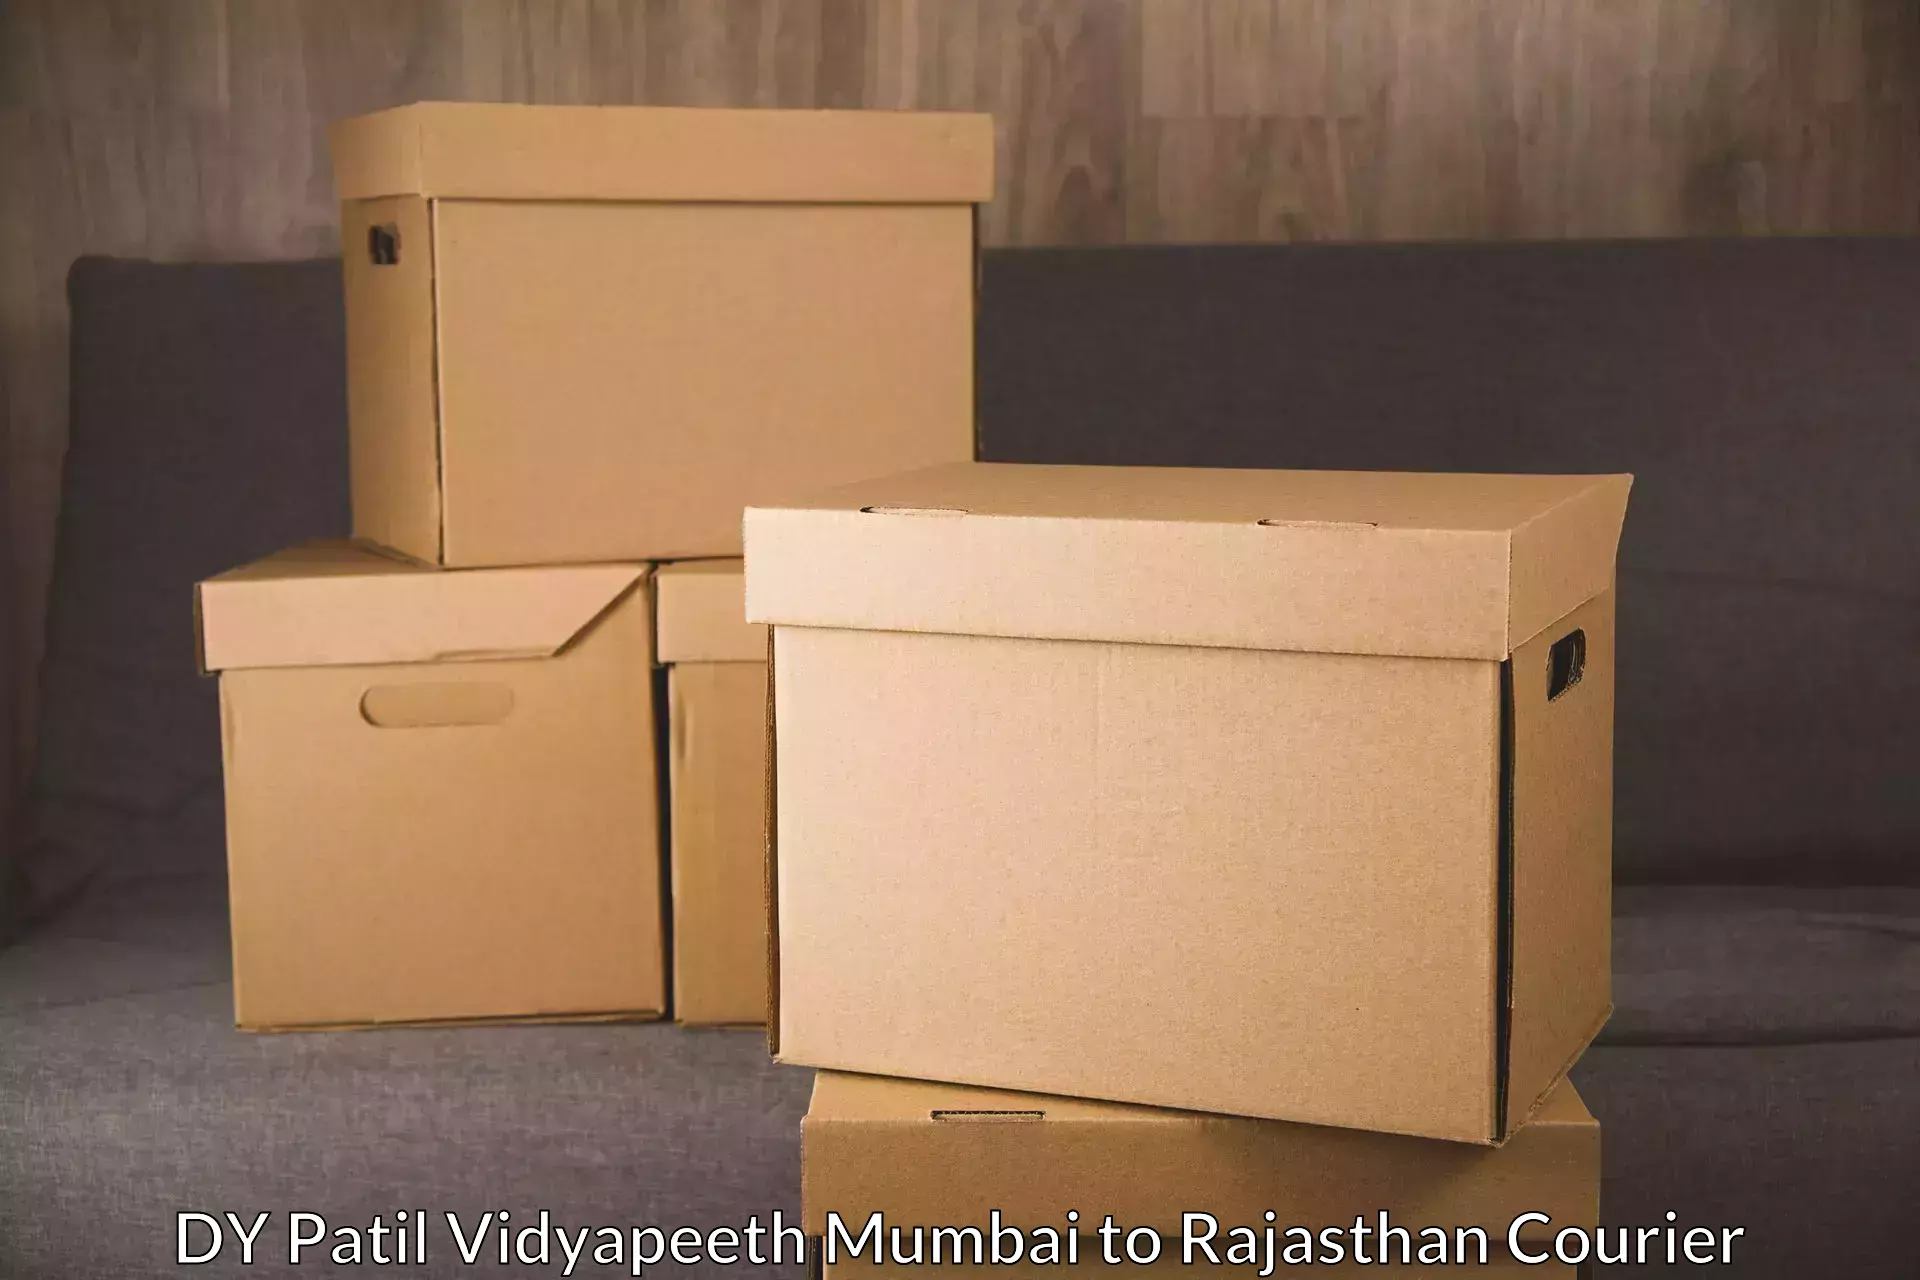 Round-the-clock parcel delivery DY Patil Vidyapeeth Mumbai to Jhalawar